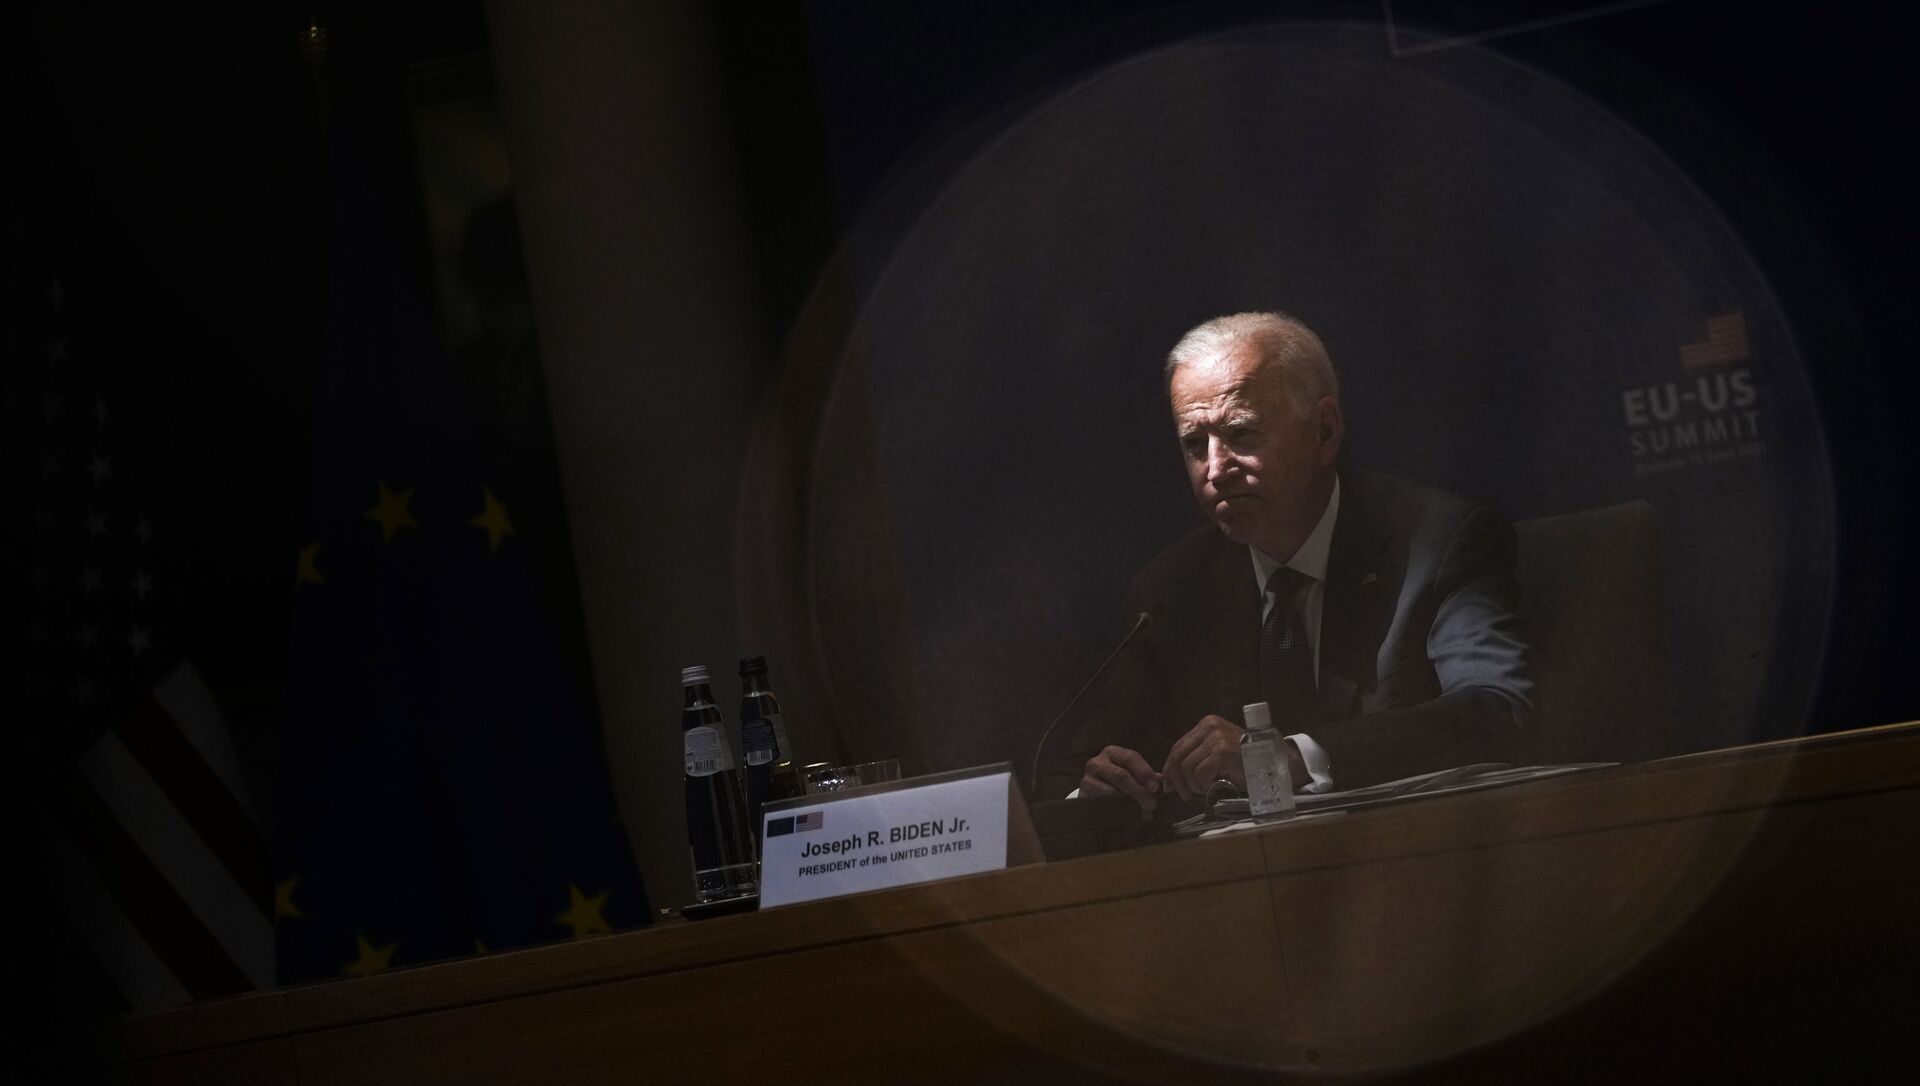 U.S. President Joe Biden listens to comments during the EU-US summit at the European Council building in Brussels, Tuesday, June 15, 2021. - Sputnik International, 1920, 15.06.2021